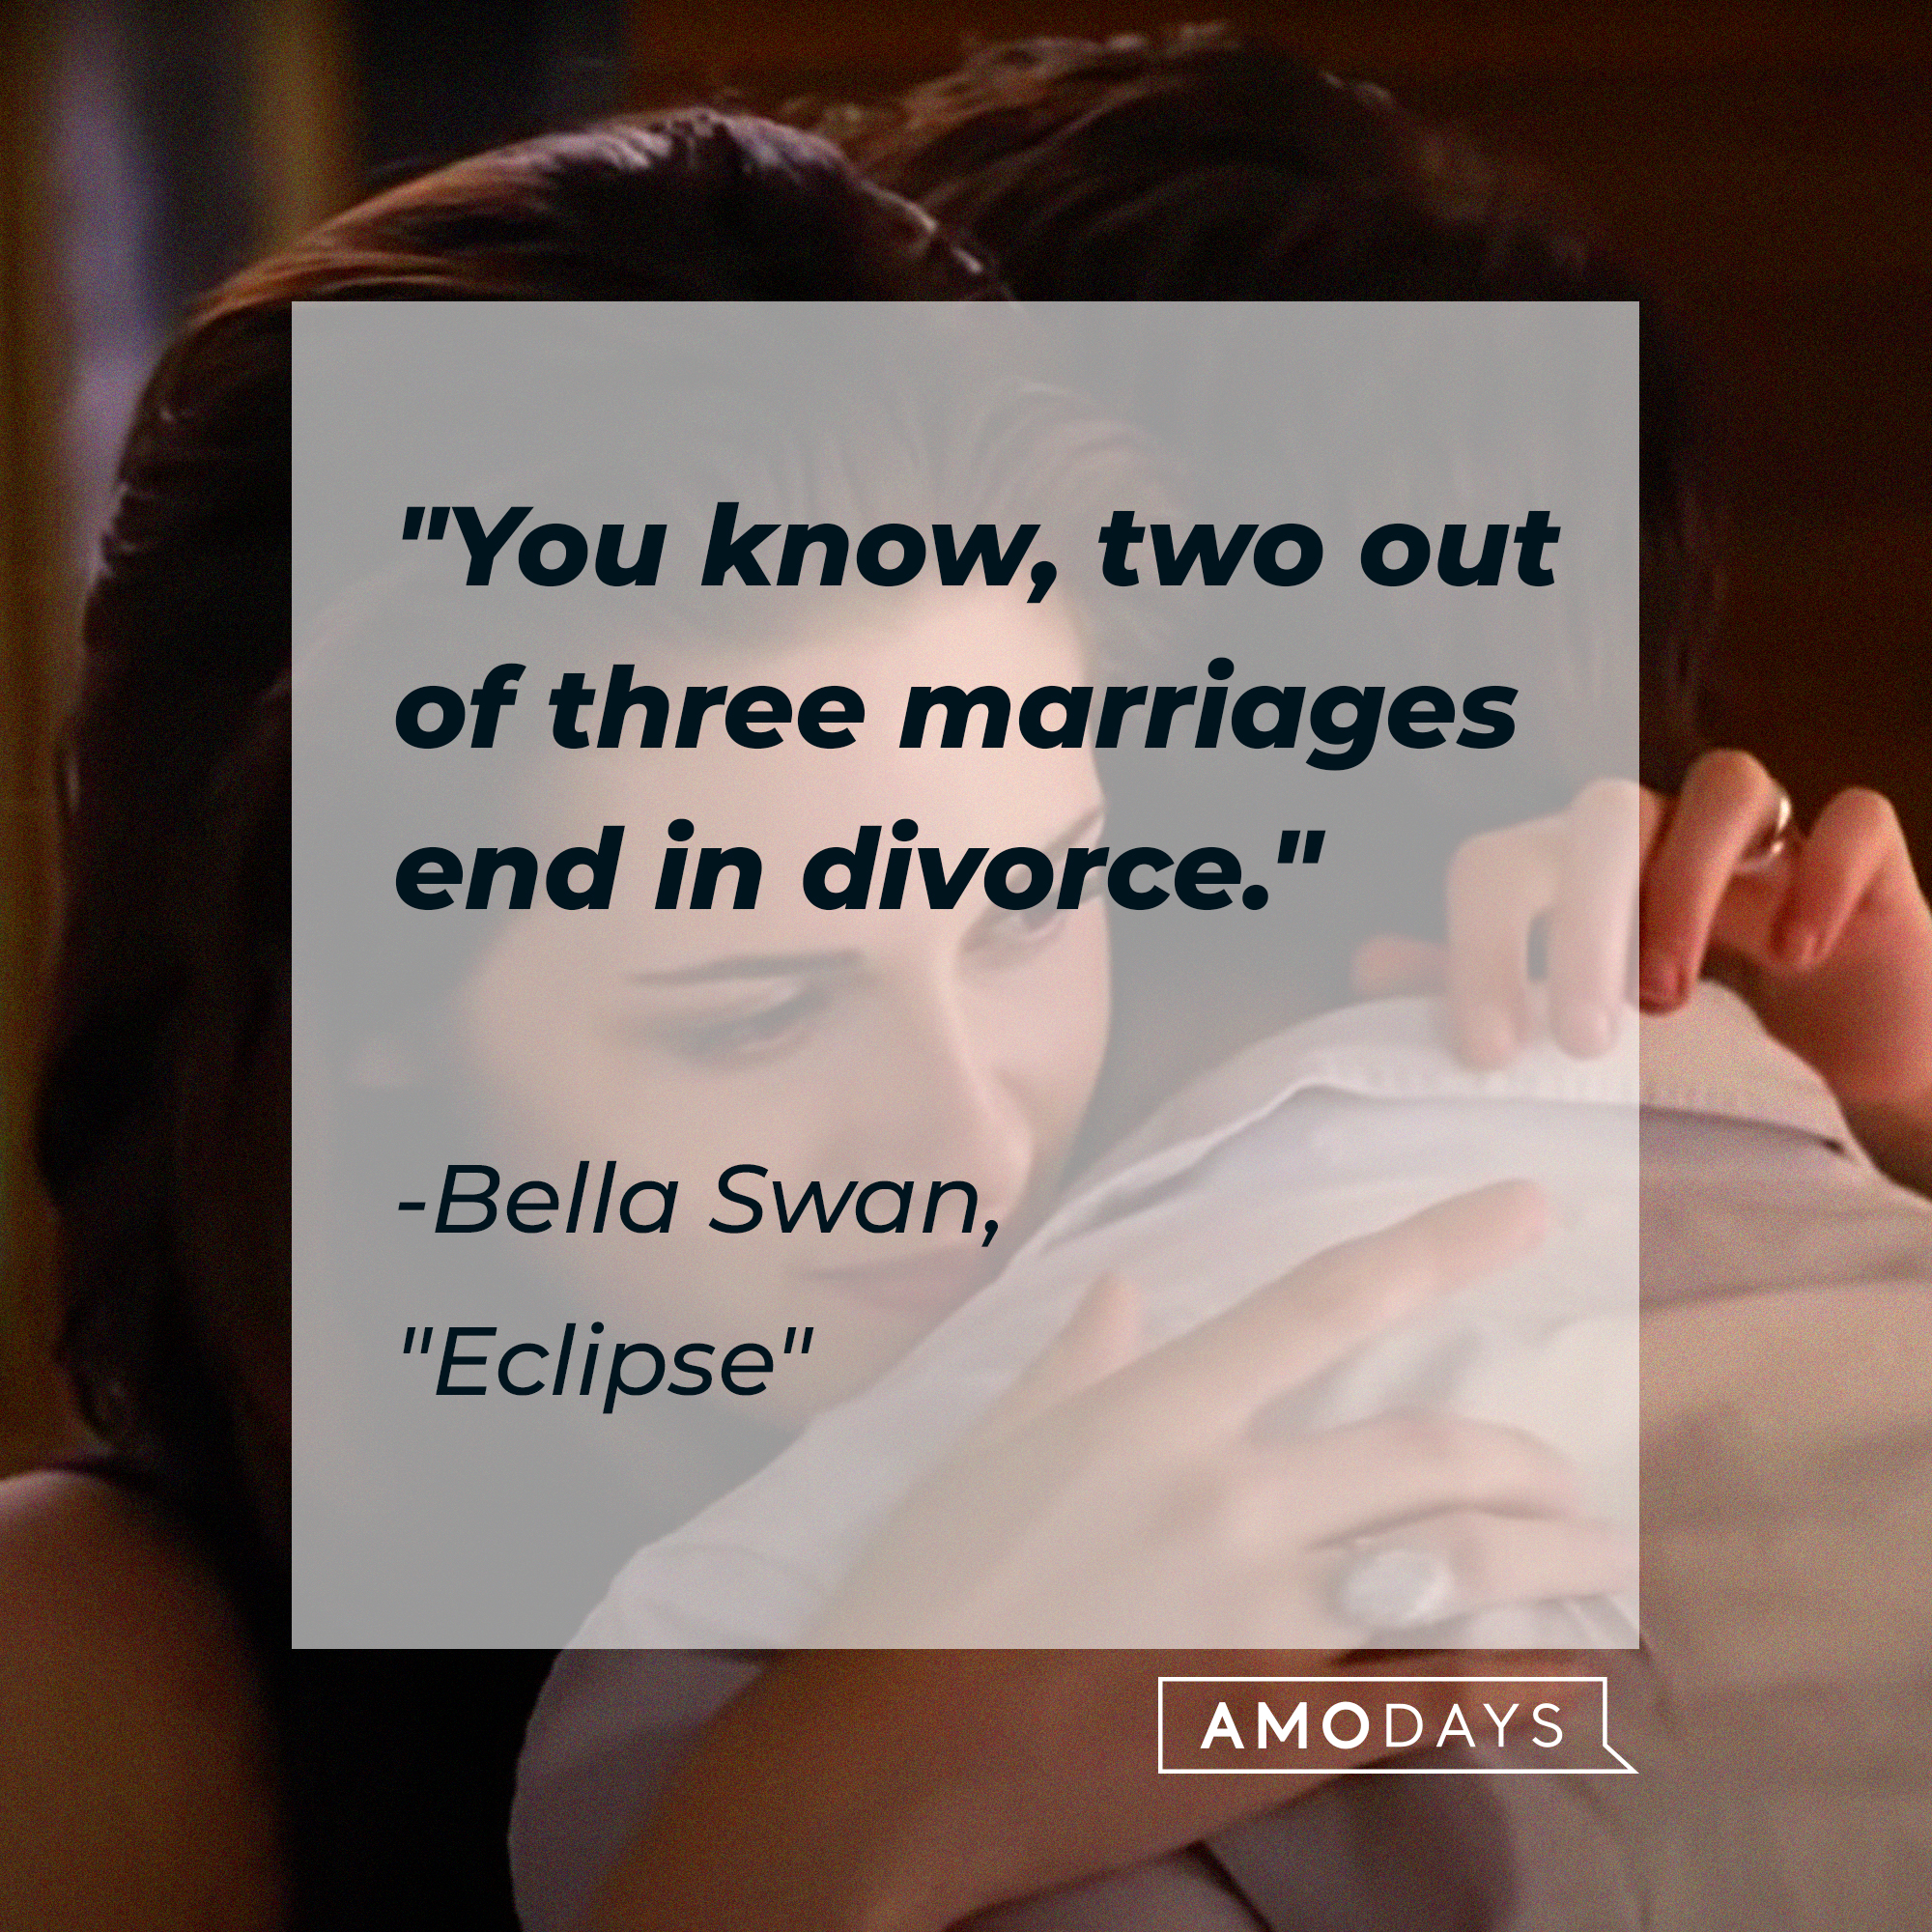 Bella Swan with her quote: "You know, two out of three marriages end in divorce." | Source: Facebook.com/twilight